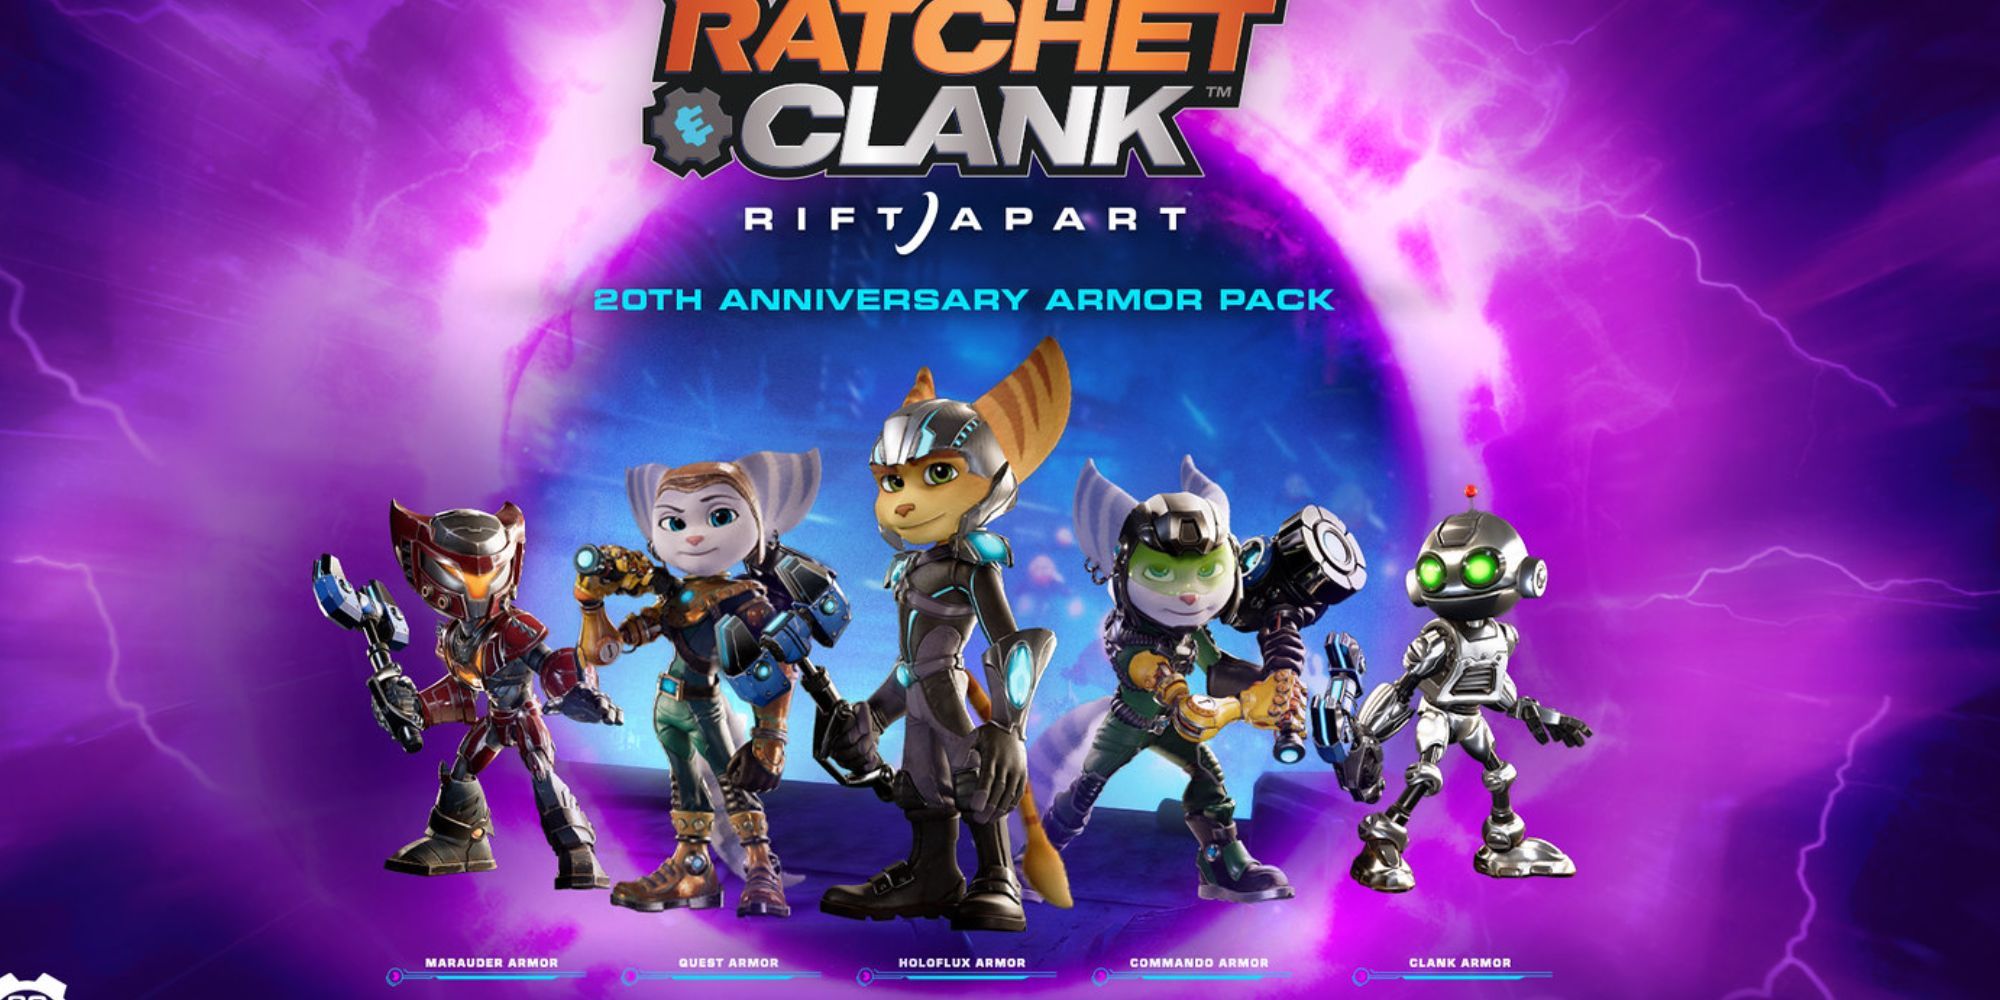 Ratchet and Clank 20th Anniversary Armor Pack